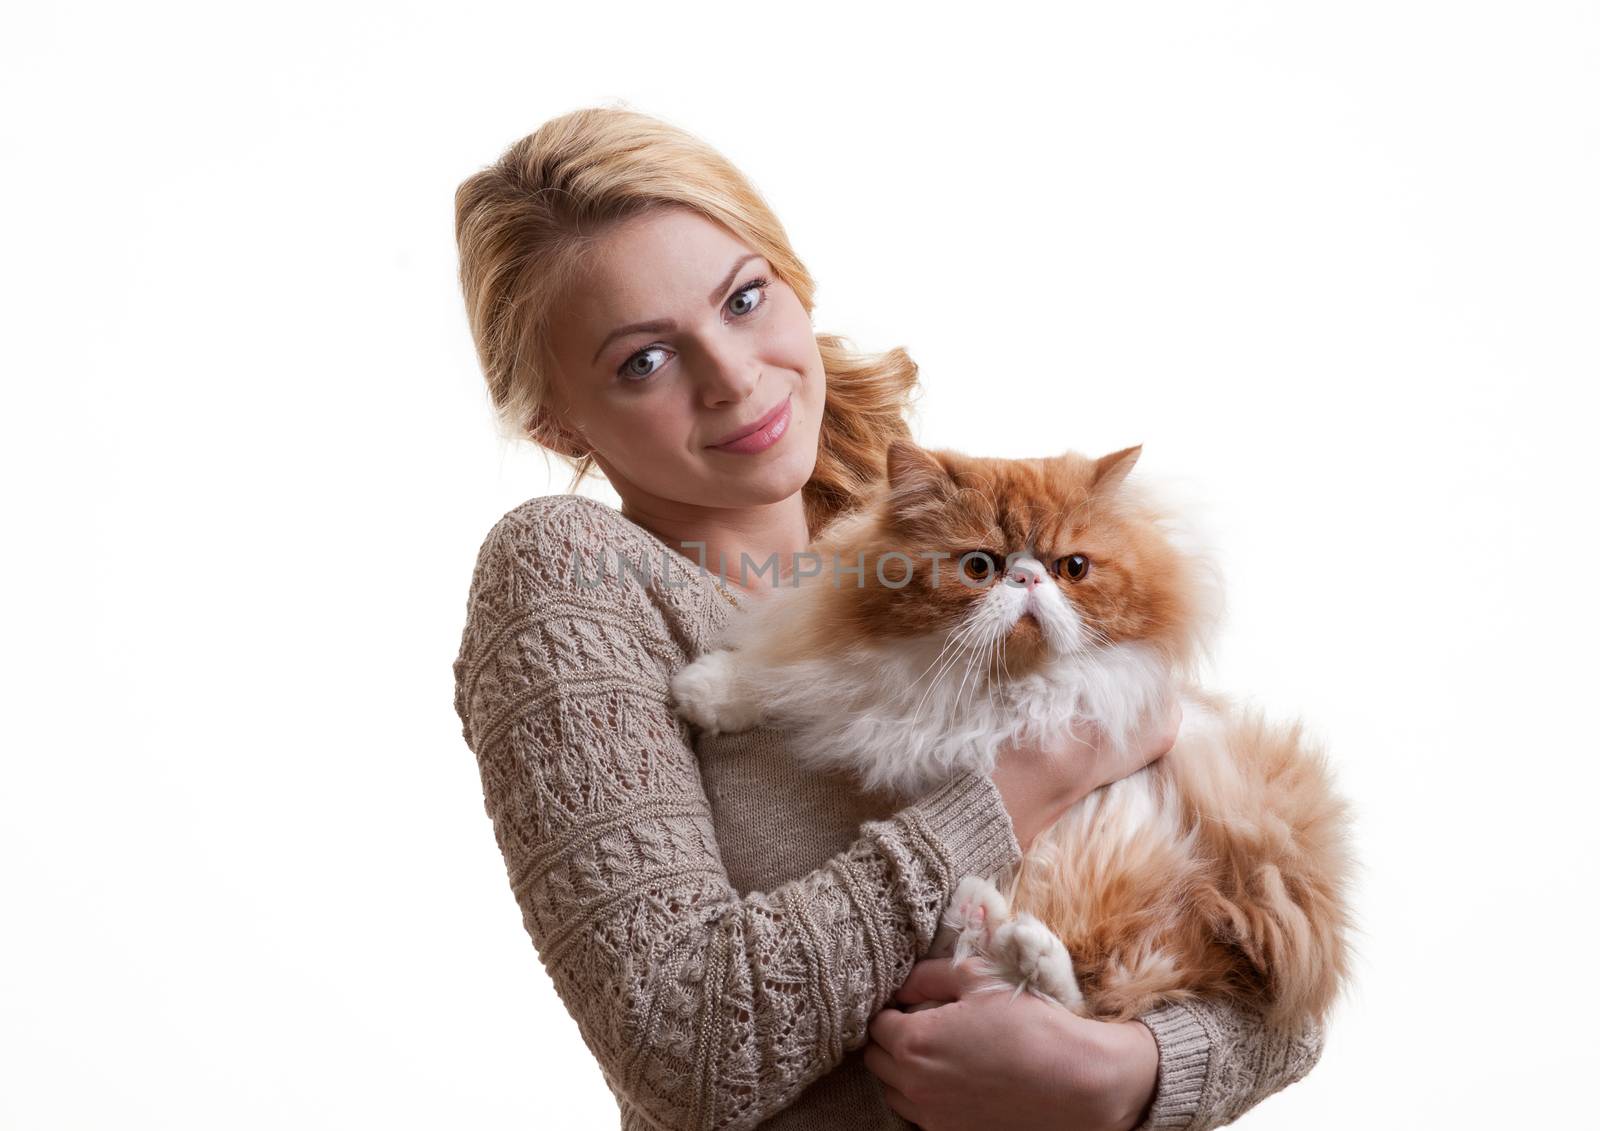 The nice girl with a red cat on hands by fotooxotnik